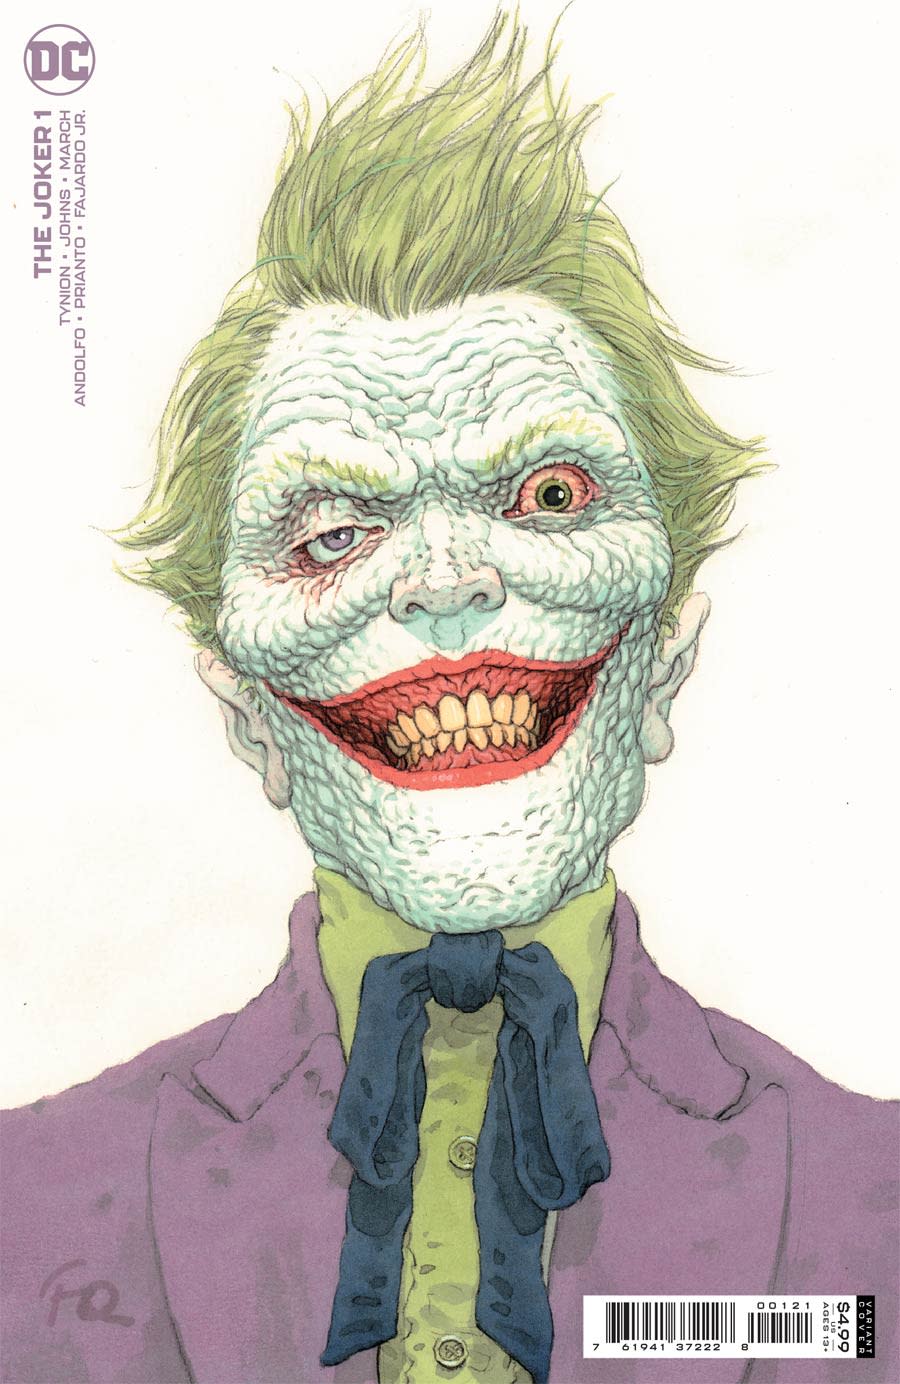 A cover for a Batman comic by Frank Quitely shows a horribly disfigured Joker smiling at the reader